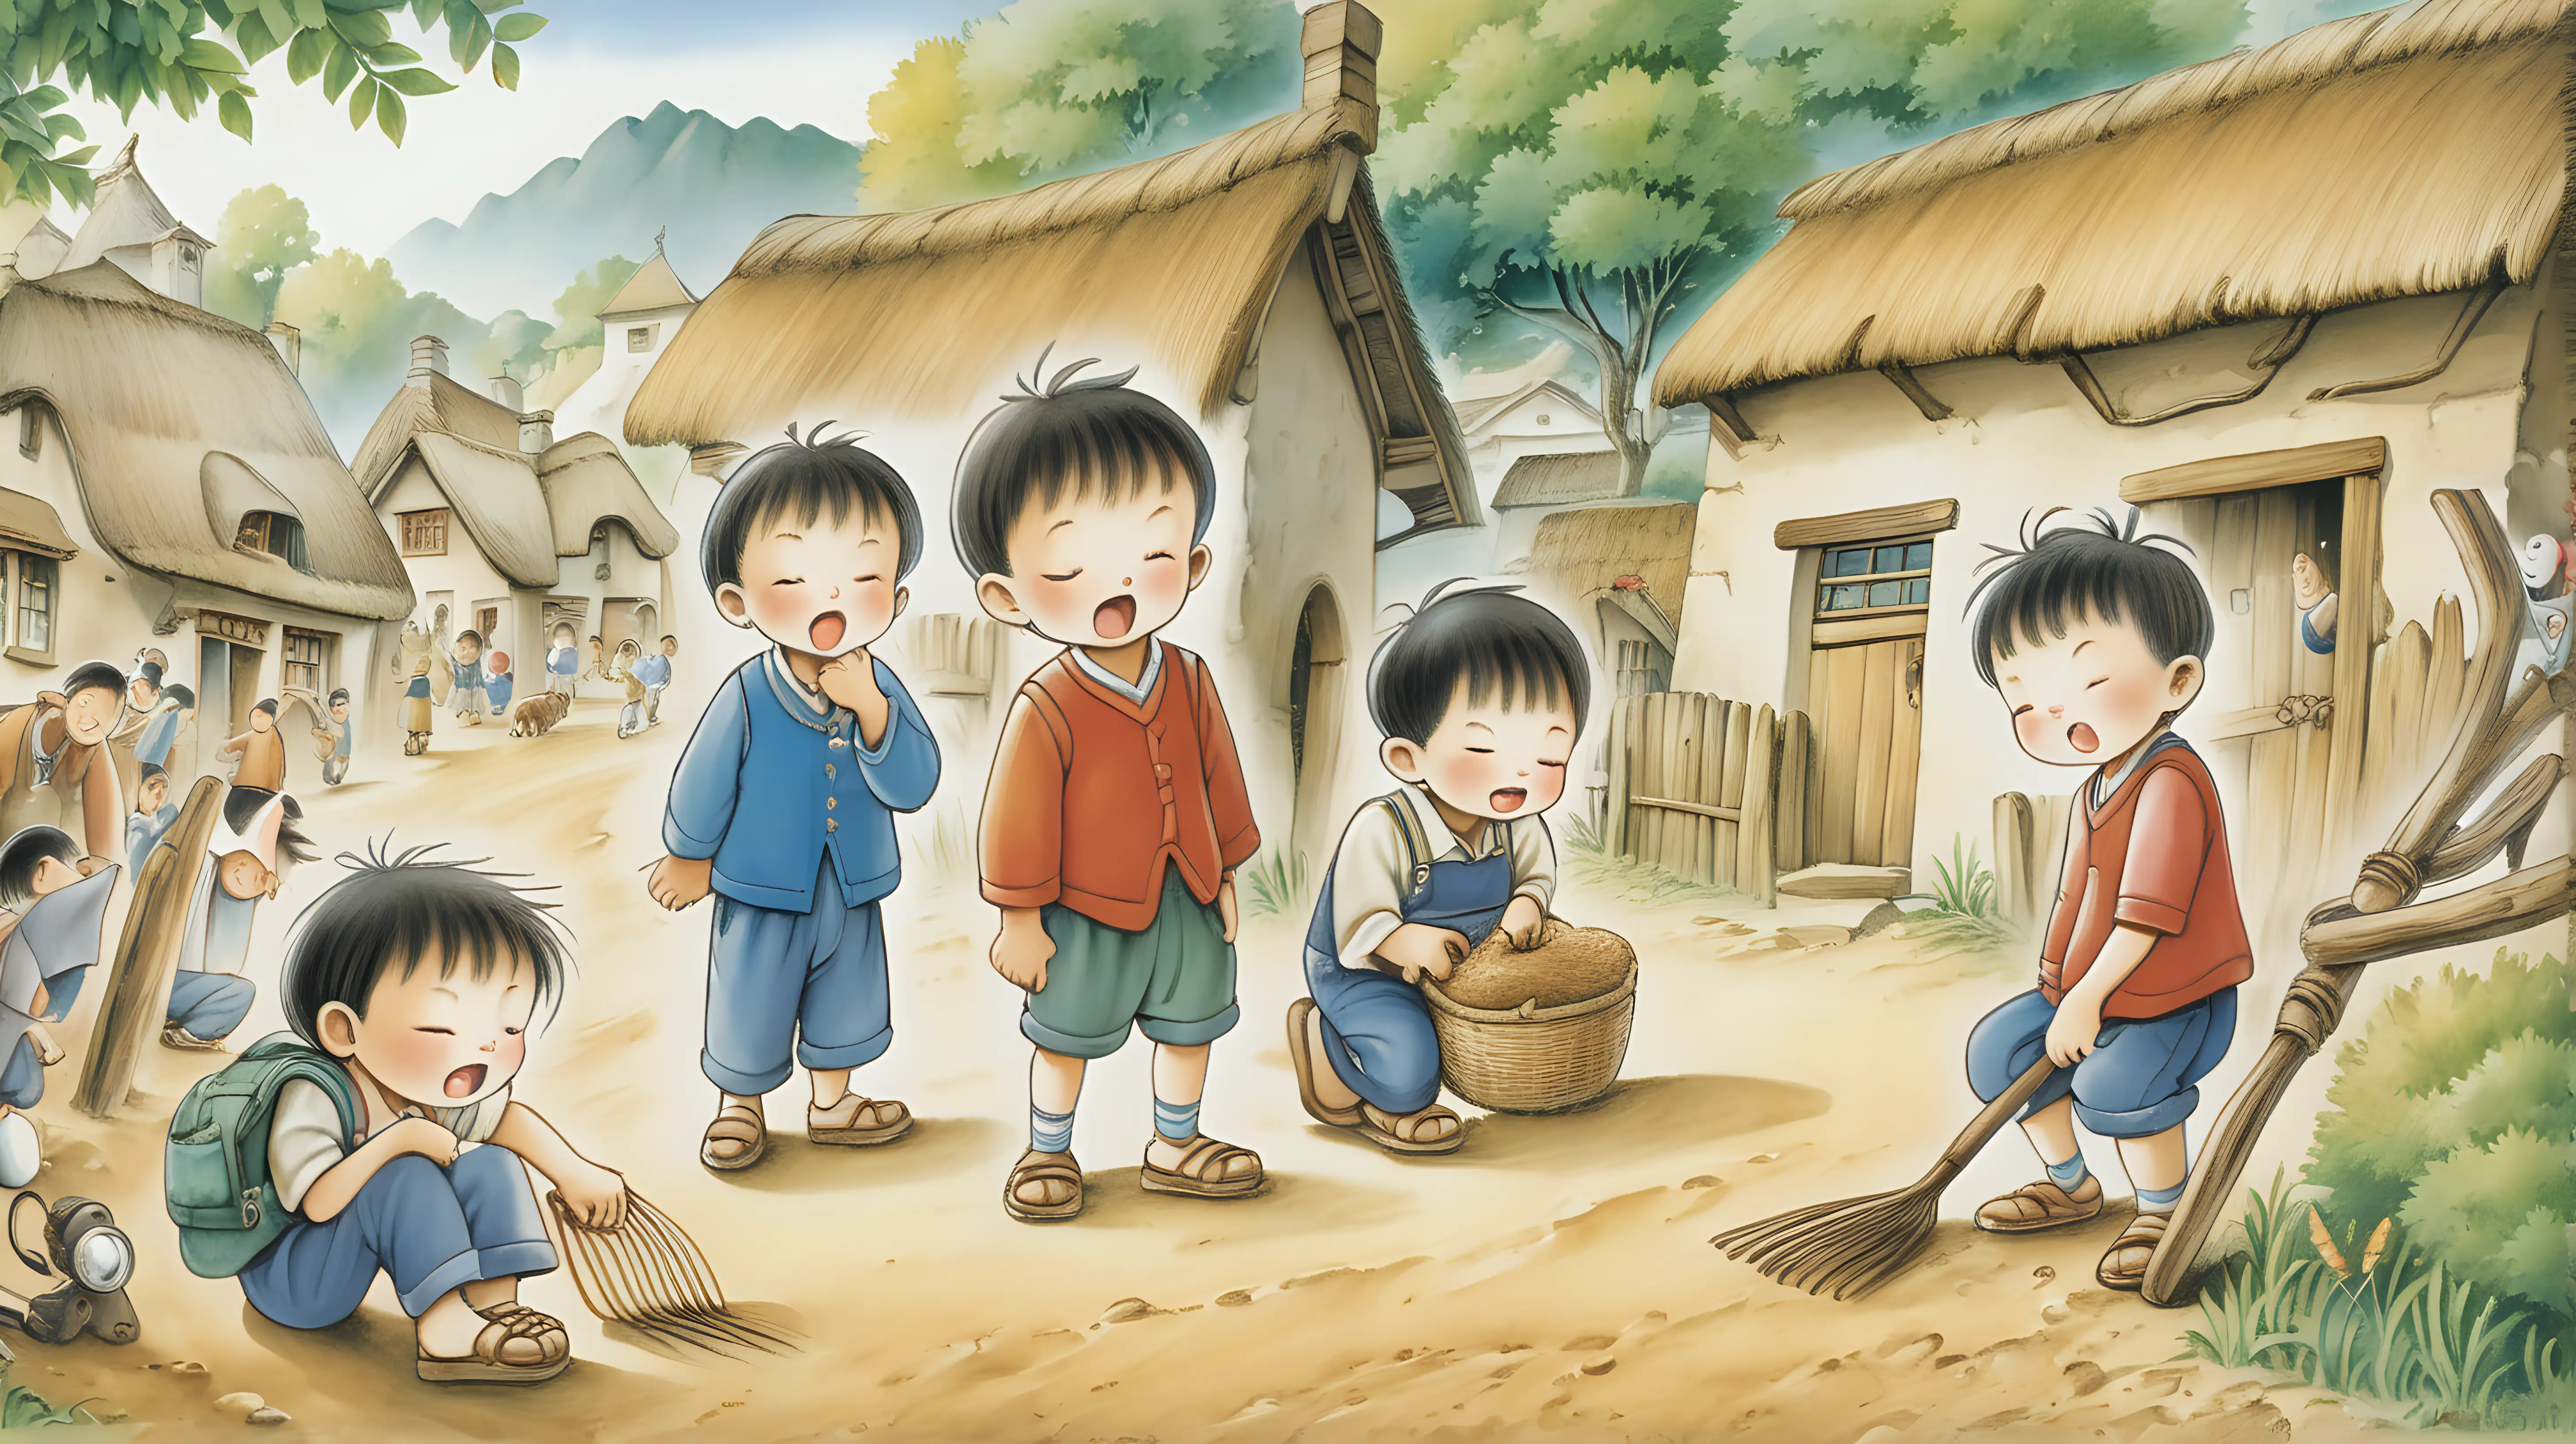 The people of the village grew so tired of the boy's antics picture book style for 5 years old
 